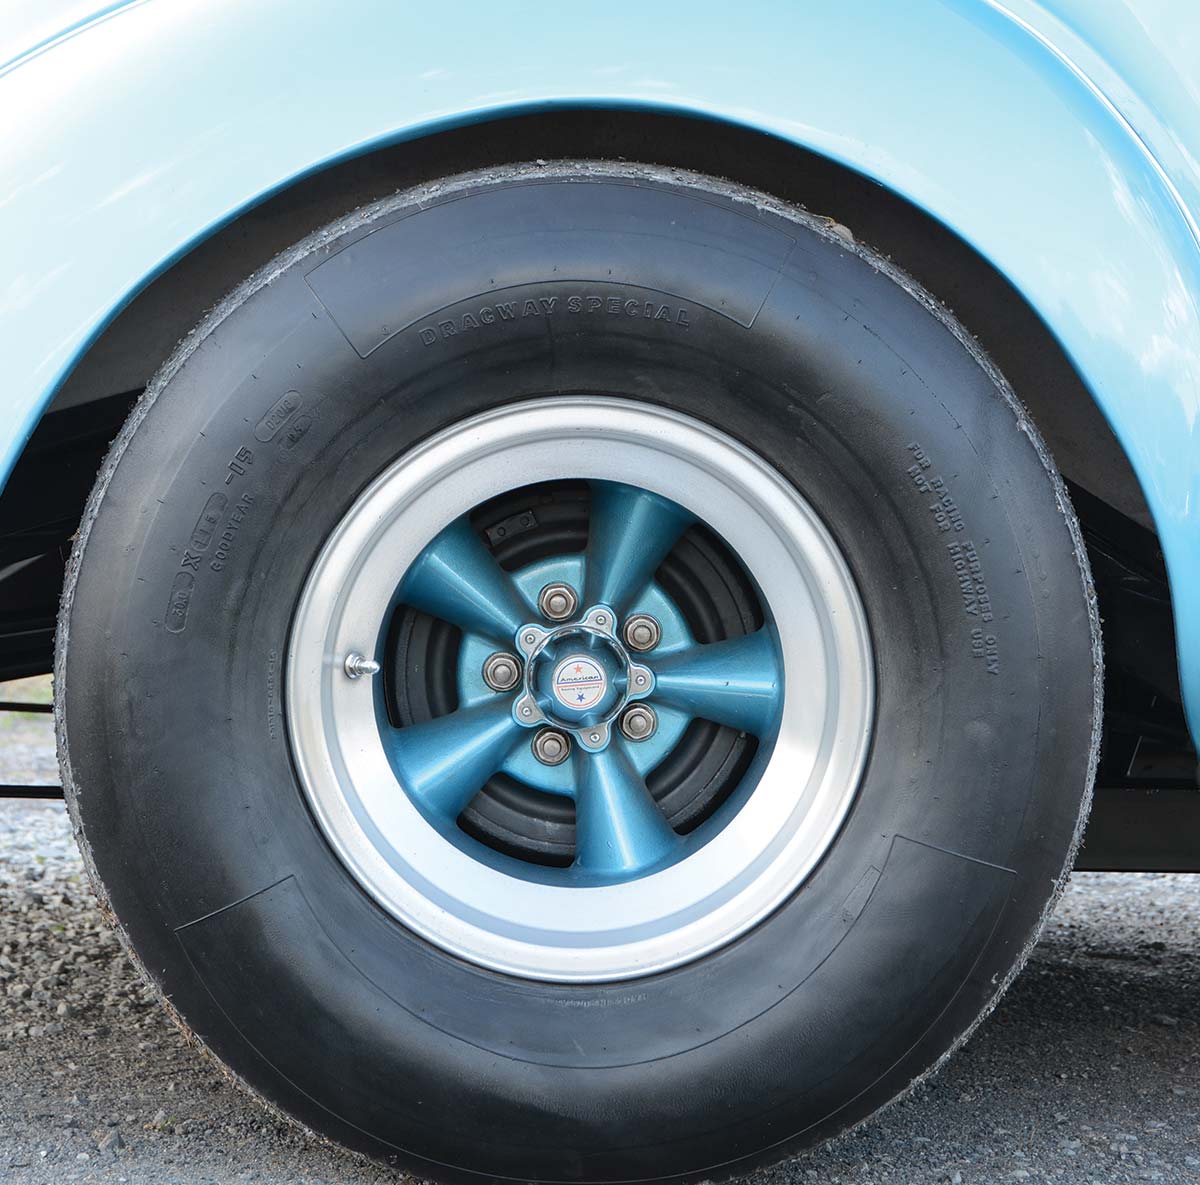 ’60s and ’70s car with painted spokes